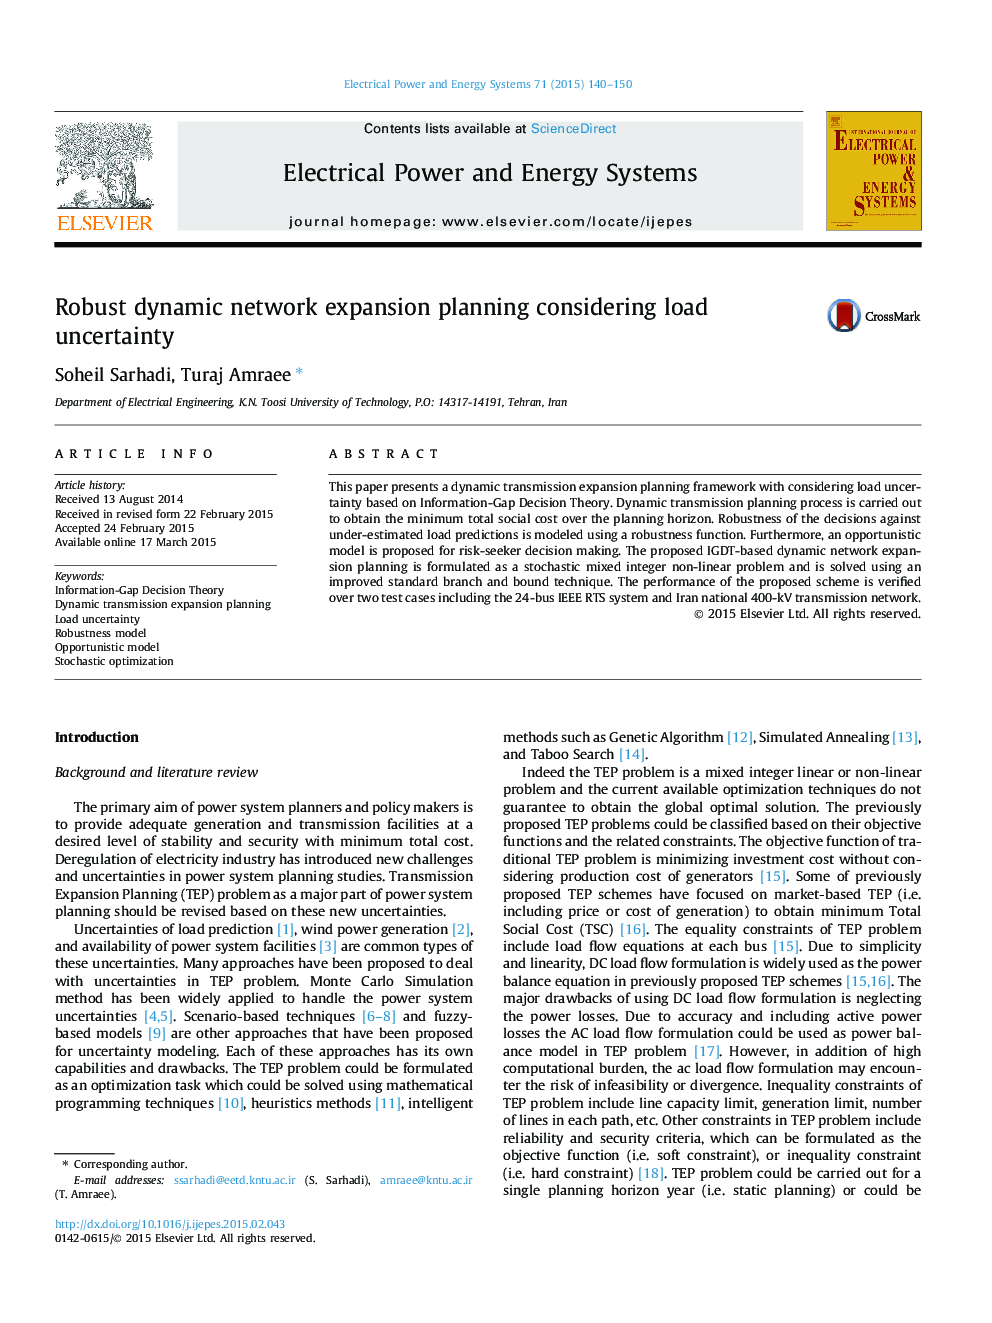 Robust dynamic network expansion planning considering load uncertainty